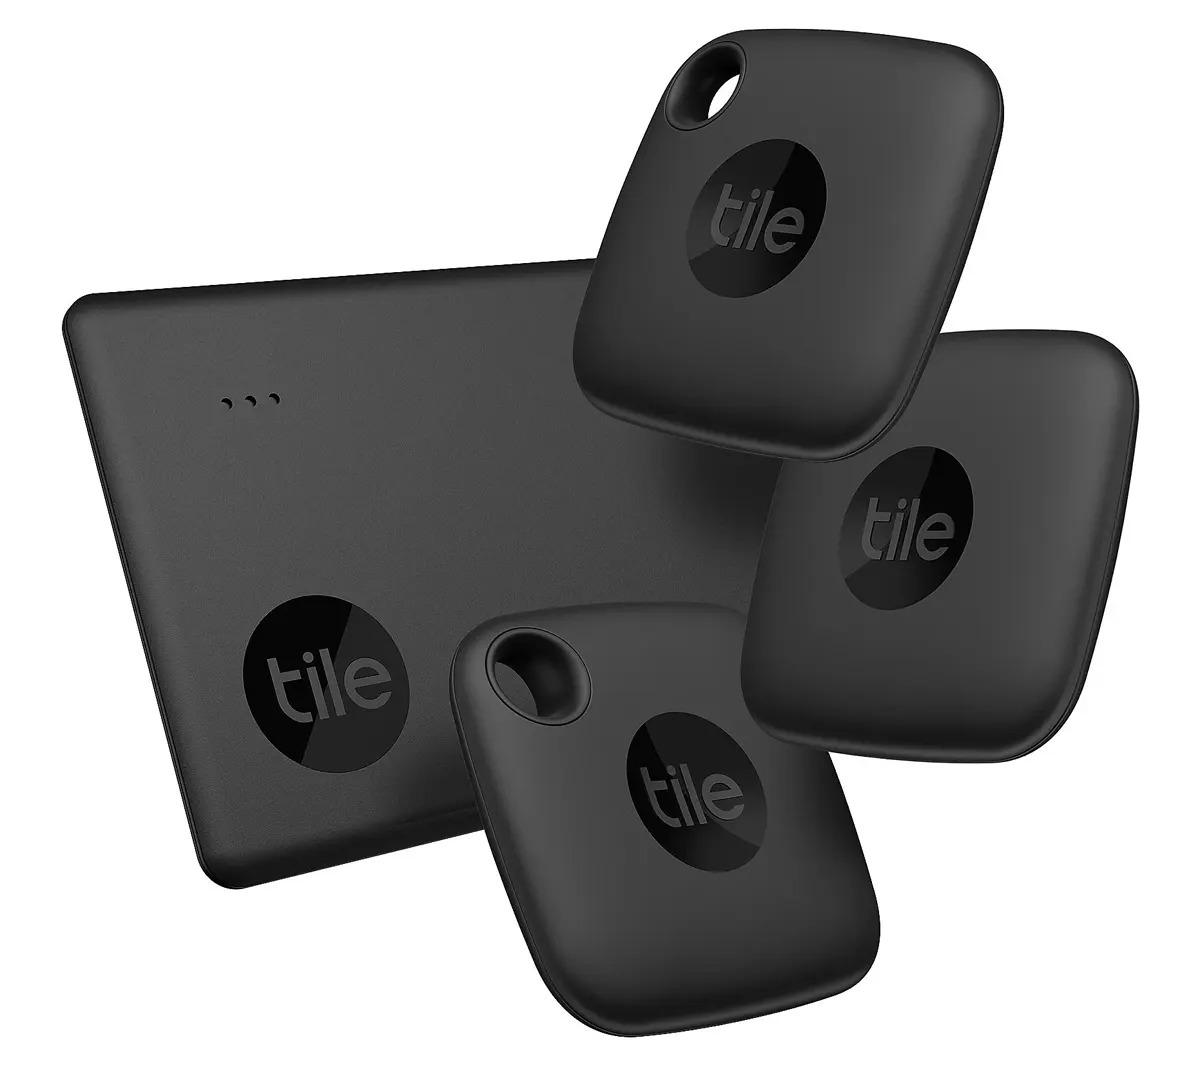 4 Tile Mate Slim Item Tracker with Gift Sleeves for $33.49 Shipped